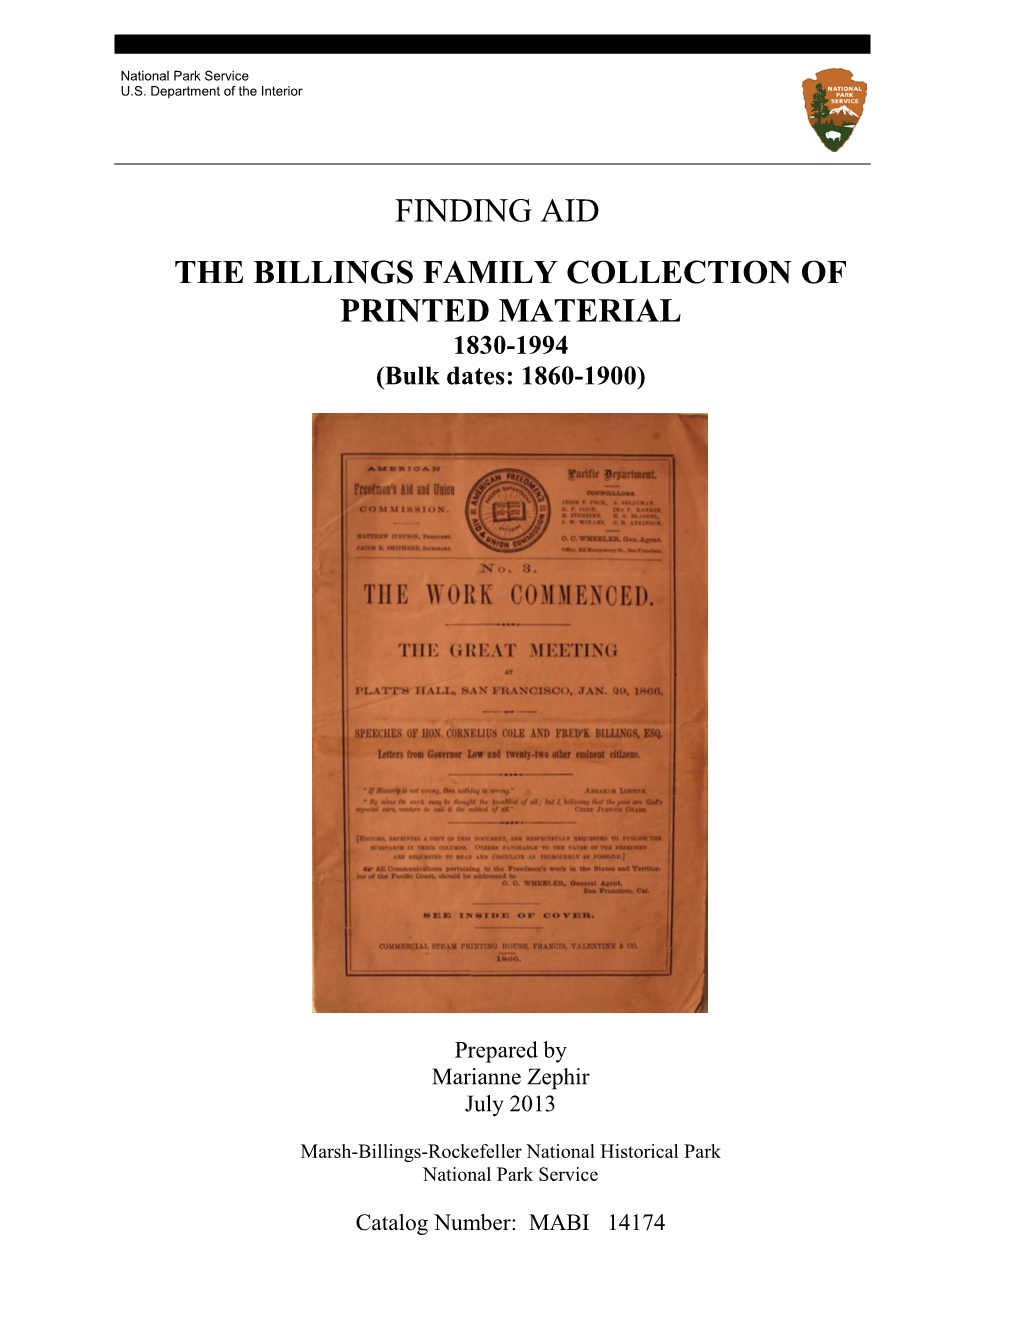 Billings Family Collection of Printed Materials